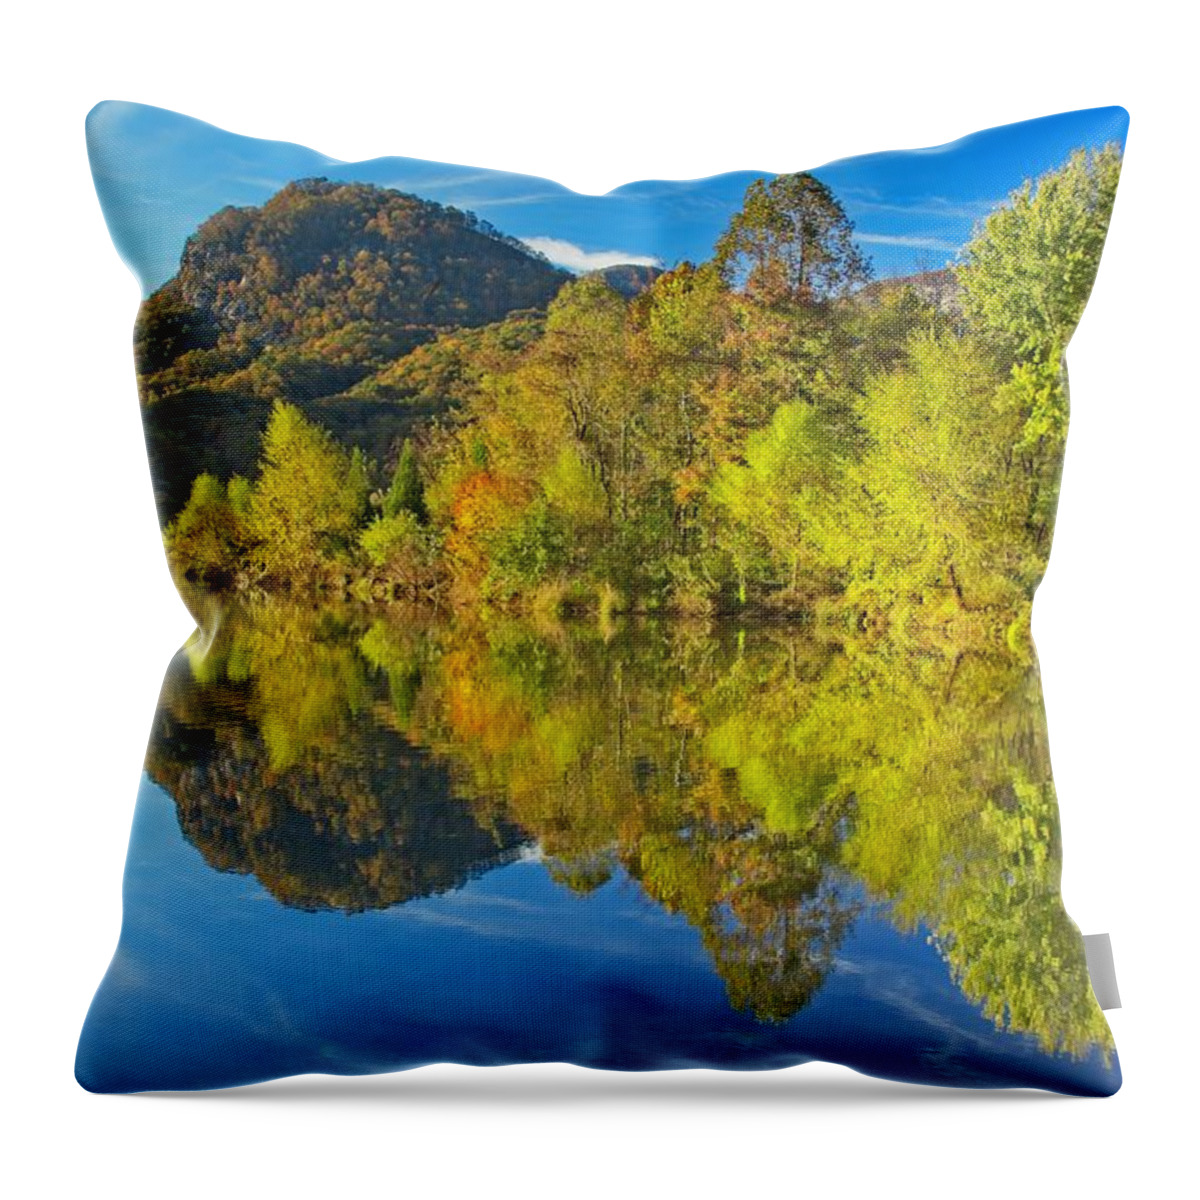 Autumn Throw Pillow featuring the photograph Autumn Reflections by Allen Nice-Webb